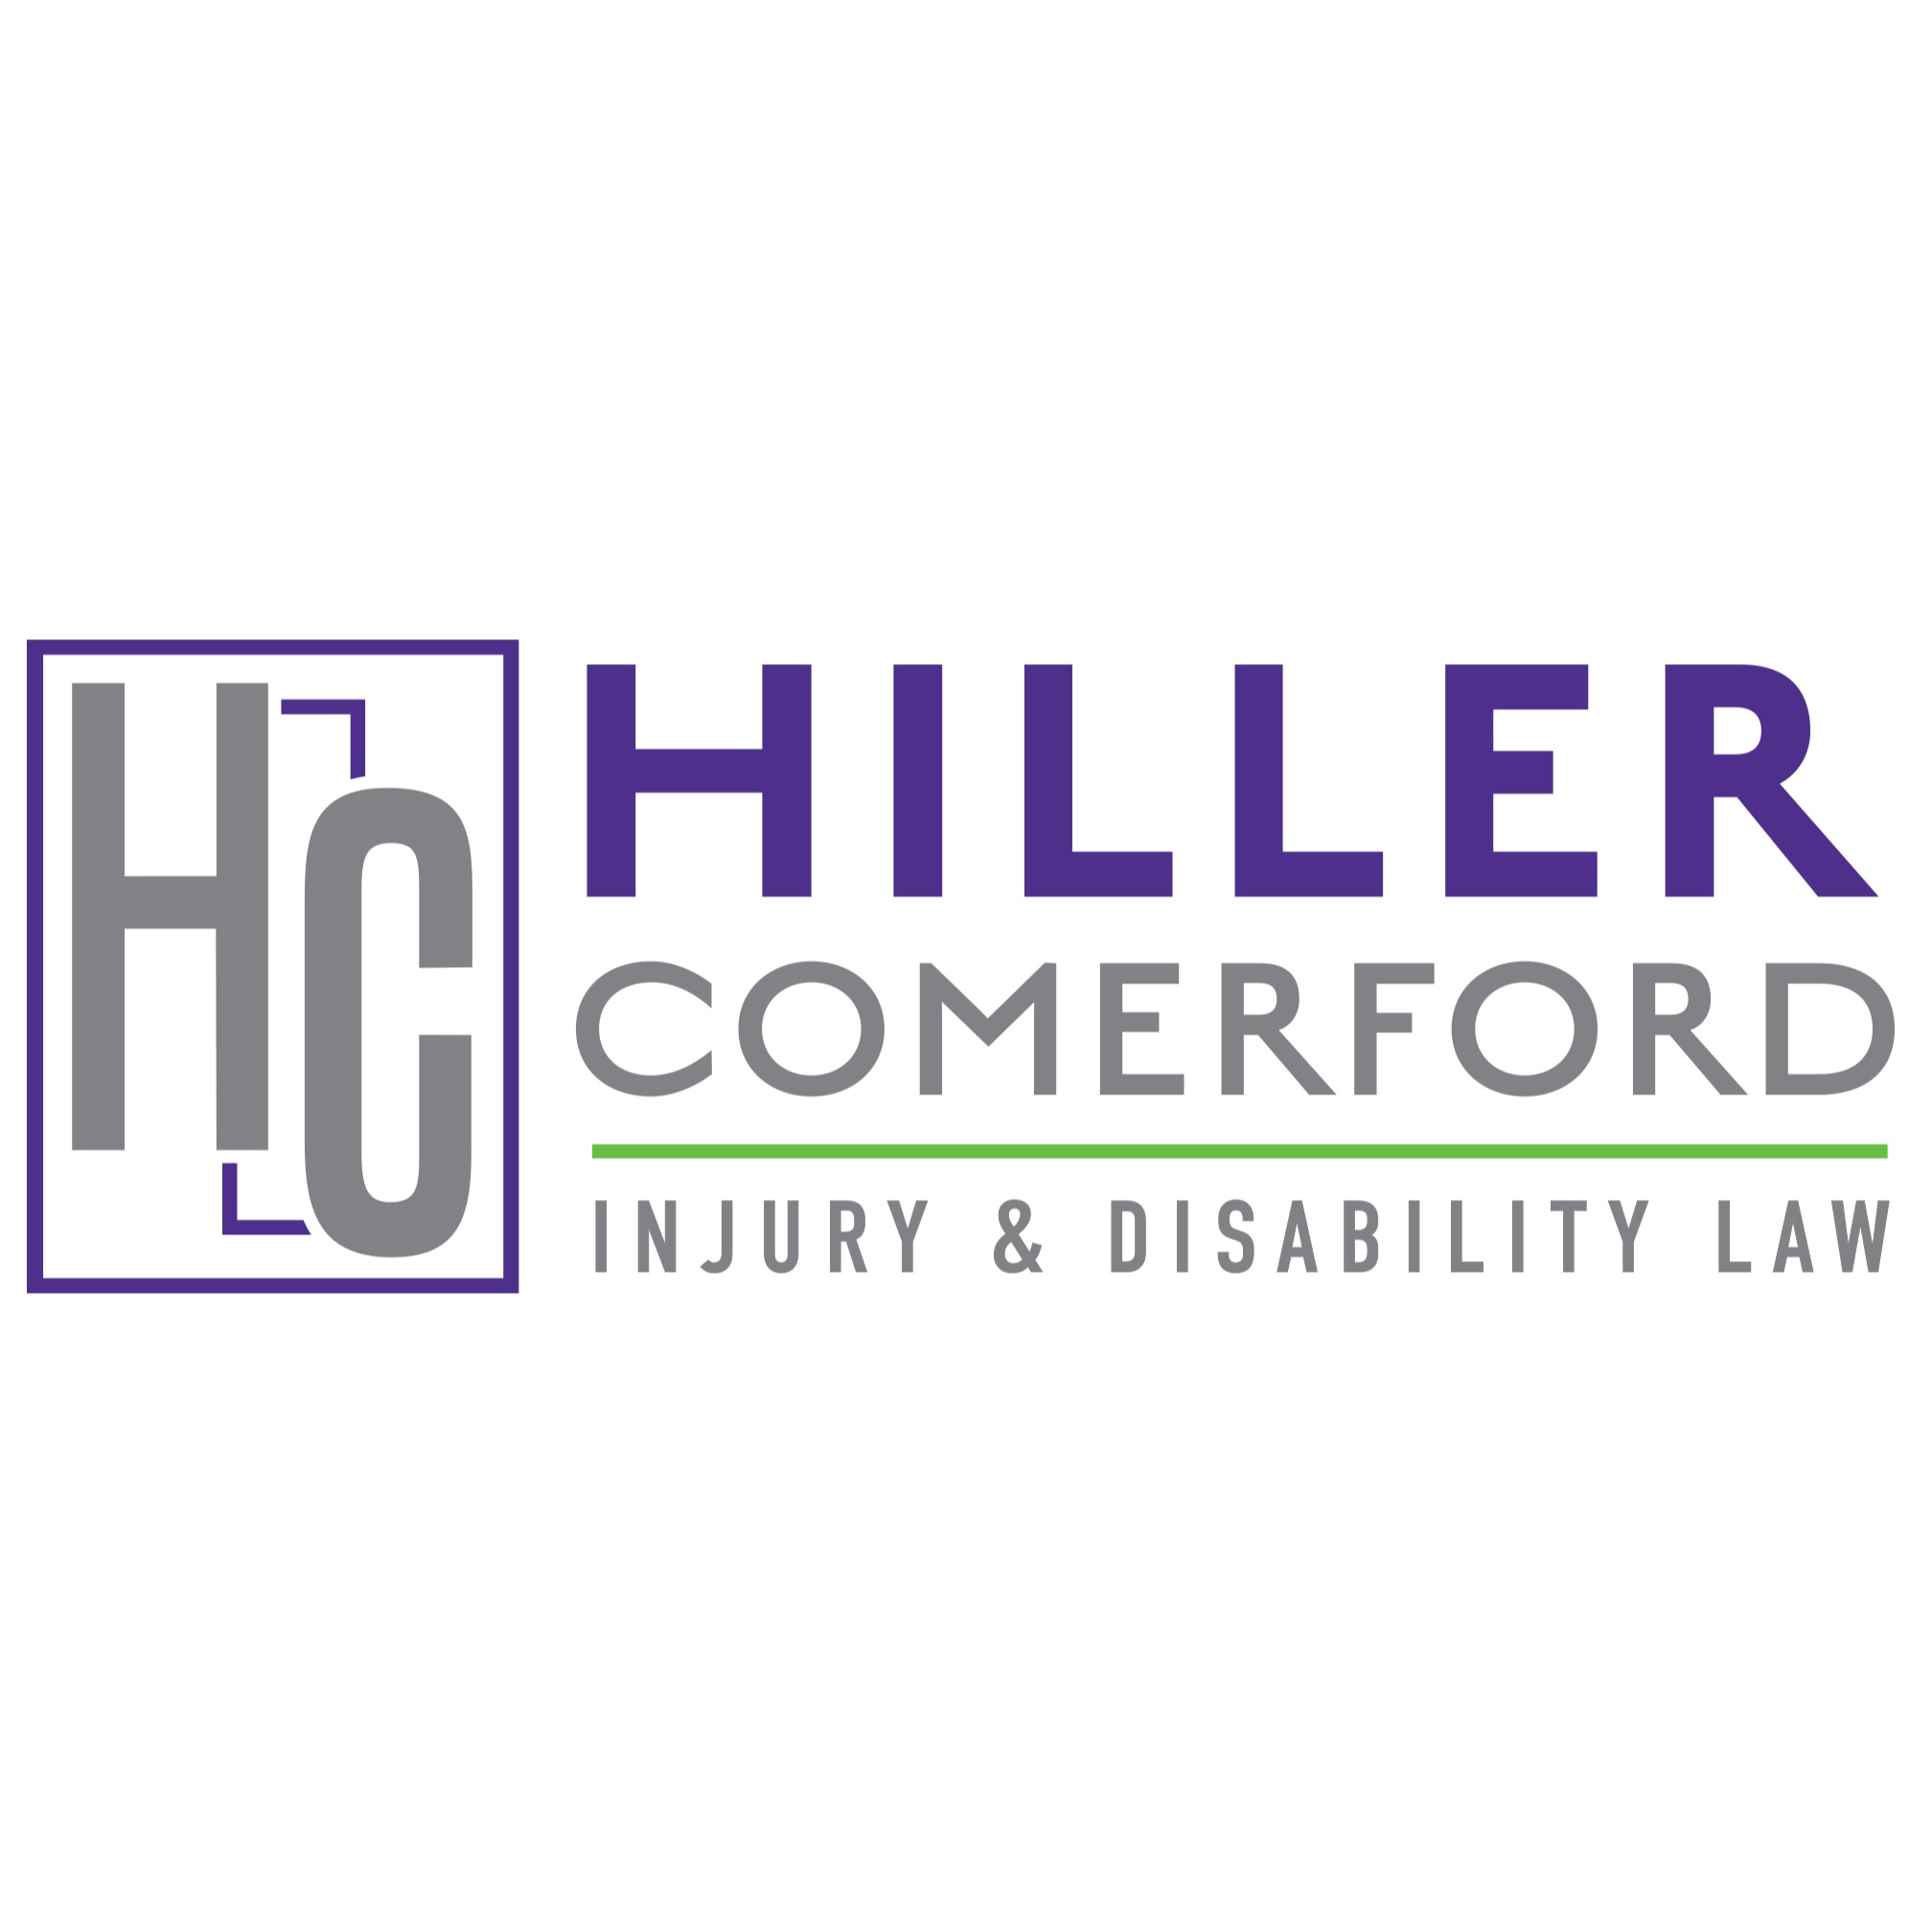 Hiller Comerford Injury & Disability Law - Rochester, NY 14624 - (866)445-5375 | ShowMeLocal.com